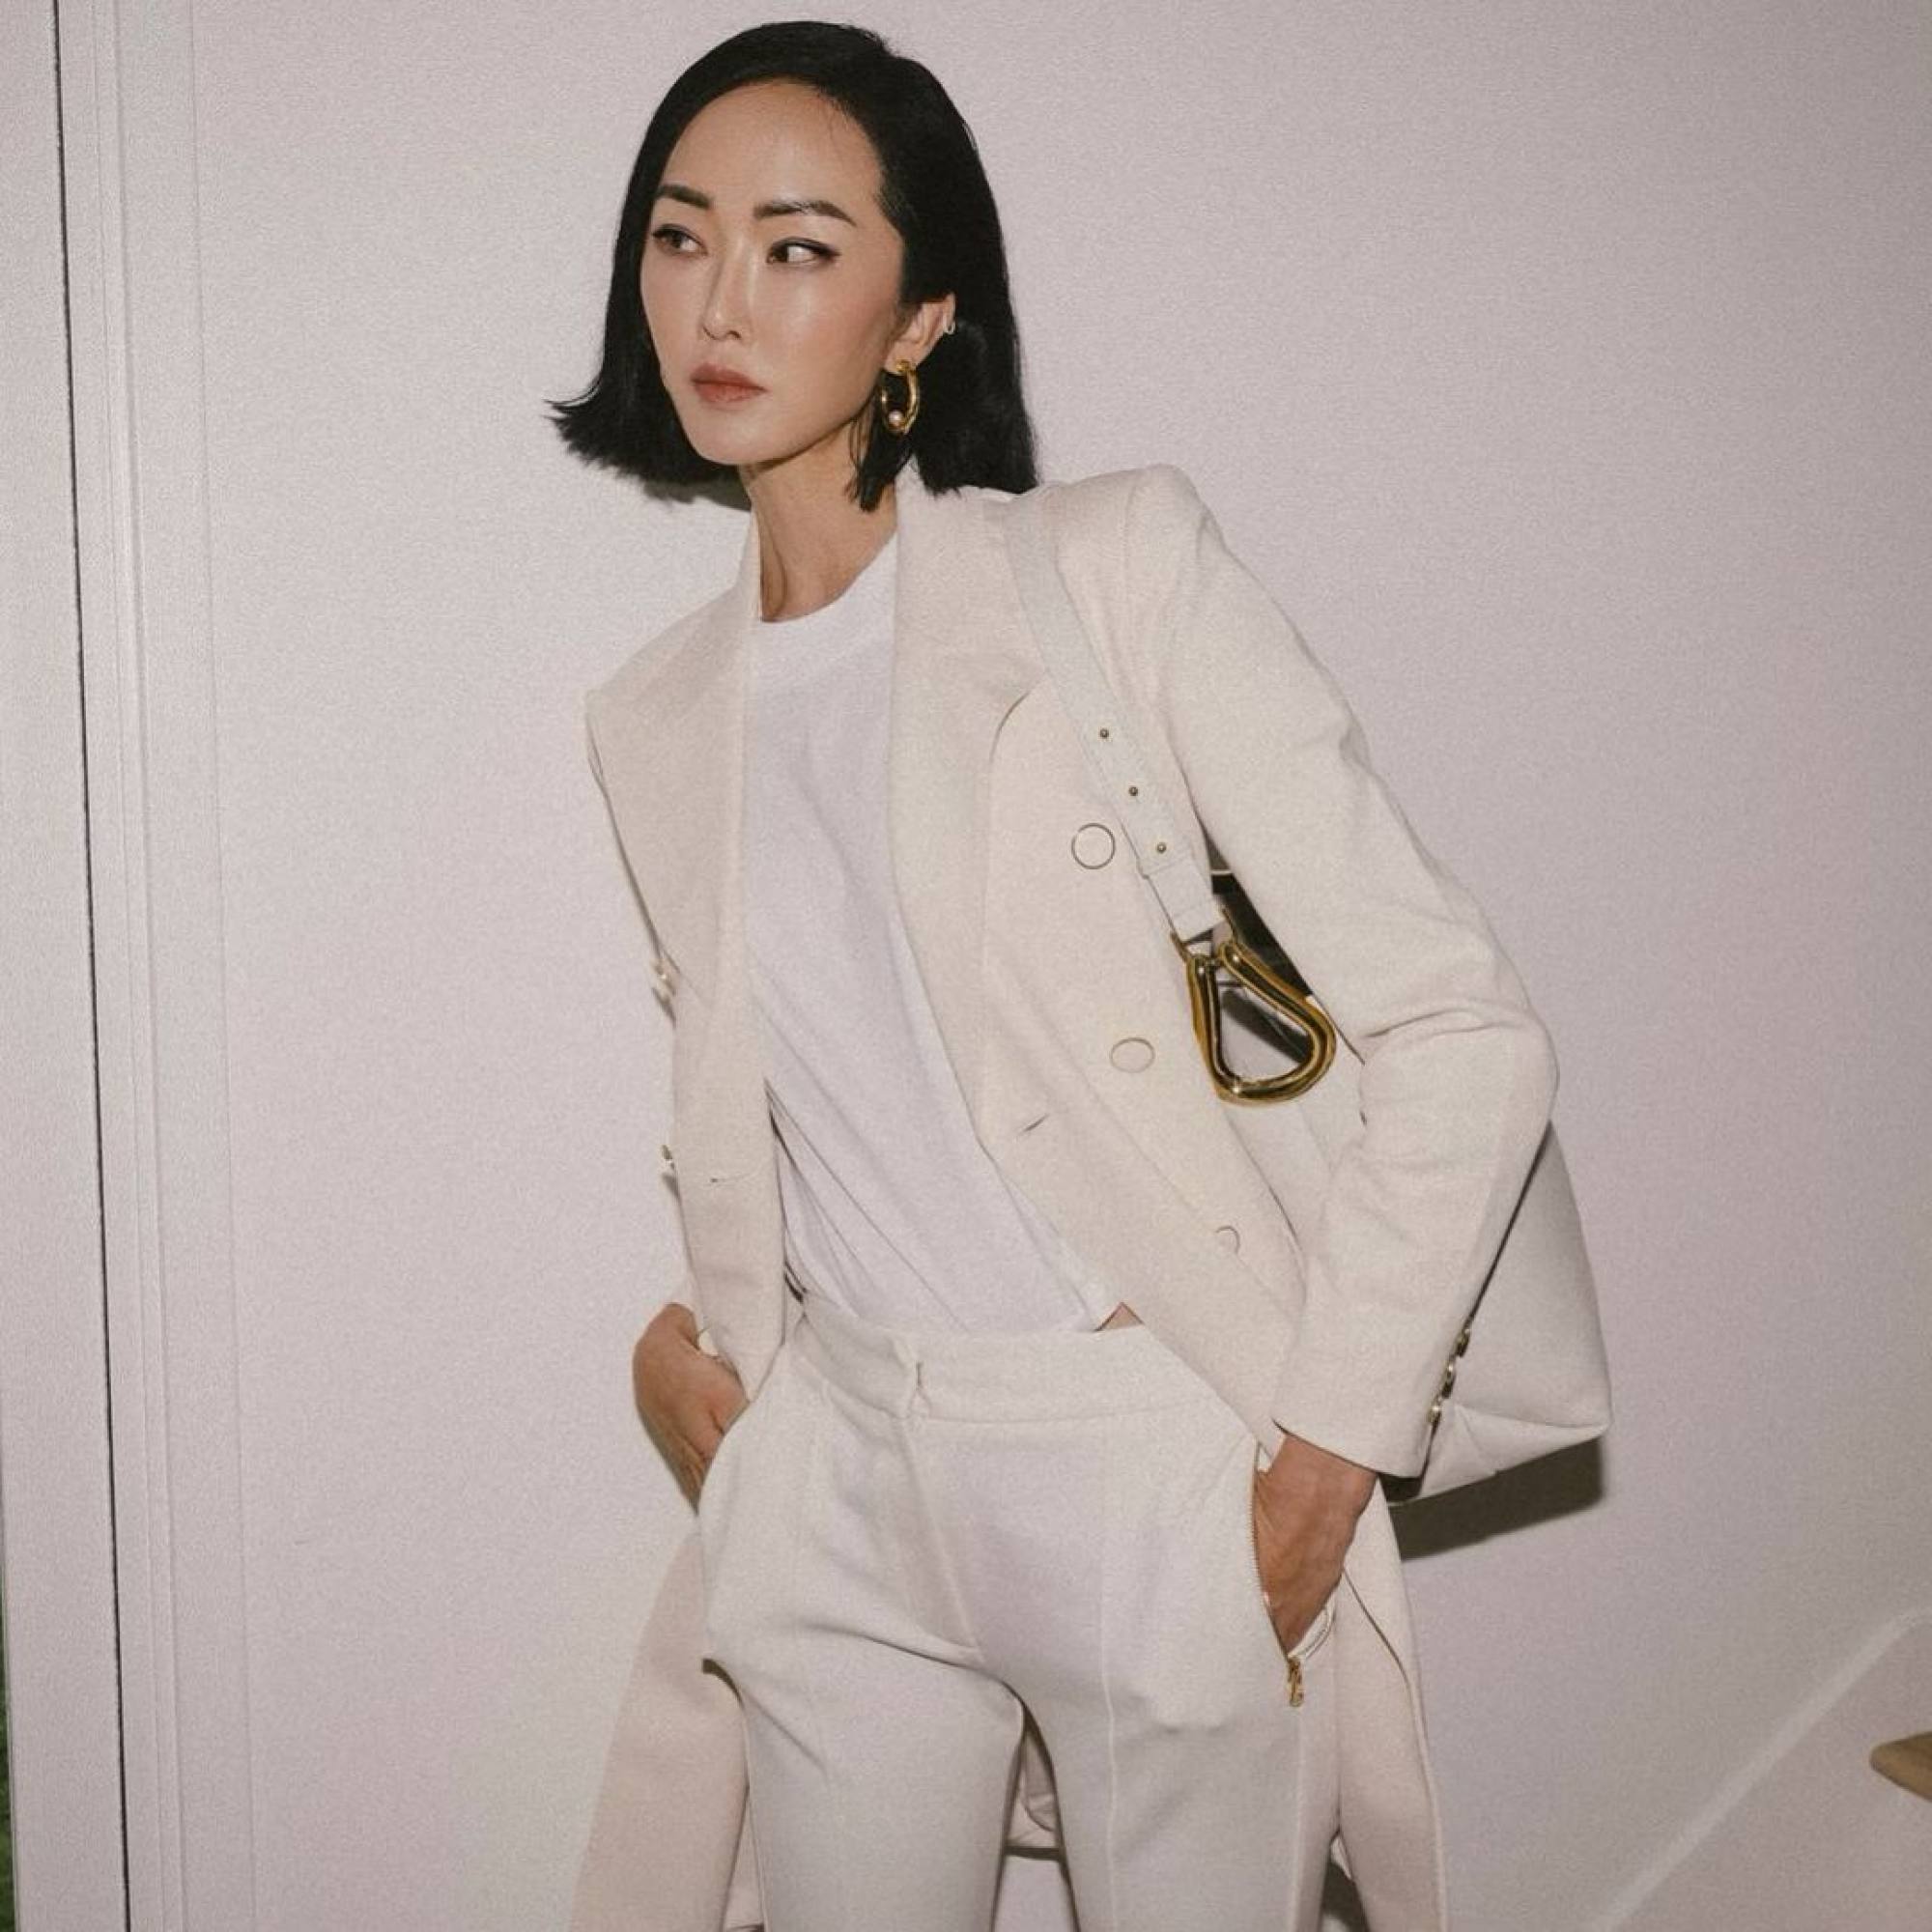 Eileen Gu on fashion, fame and success – the Olympic idol opens up